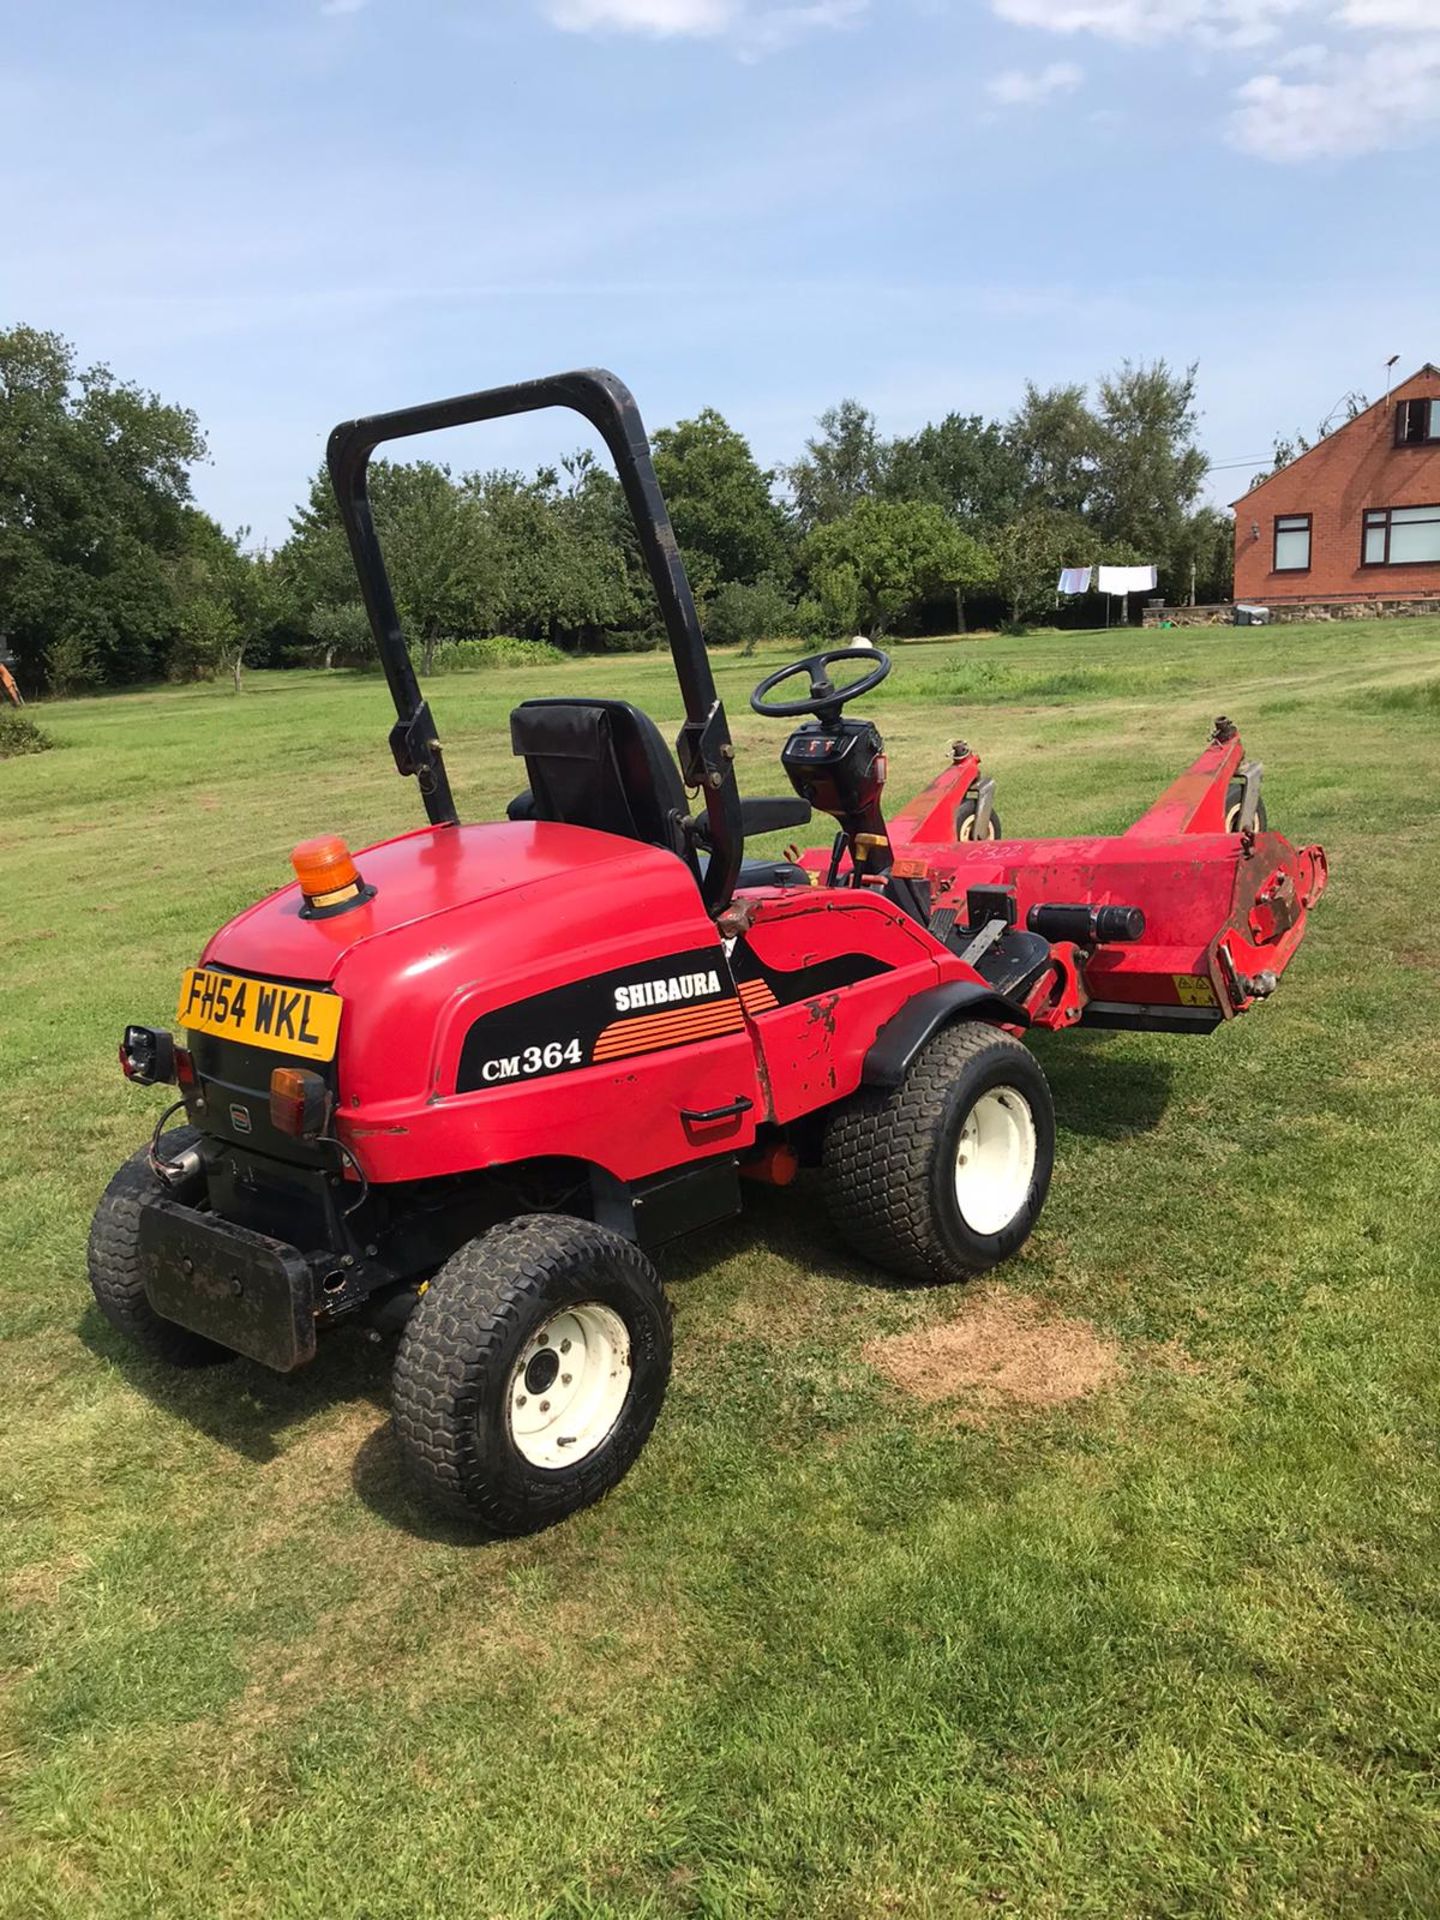 2004 SHIBAURA CM364 RIDE ON LAWN MOWER, RUNS, DRIVES AND CUTS, ROAD LEGAL, 2080 HOURS *PLUS VAT* - Image 3 of 6